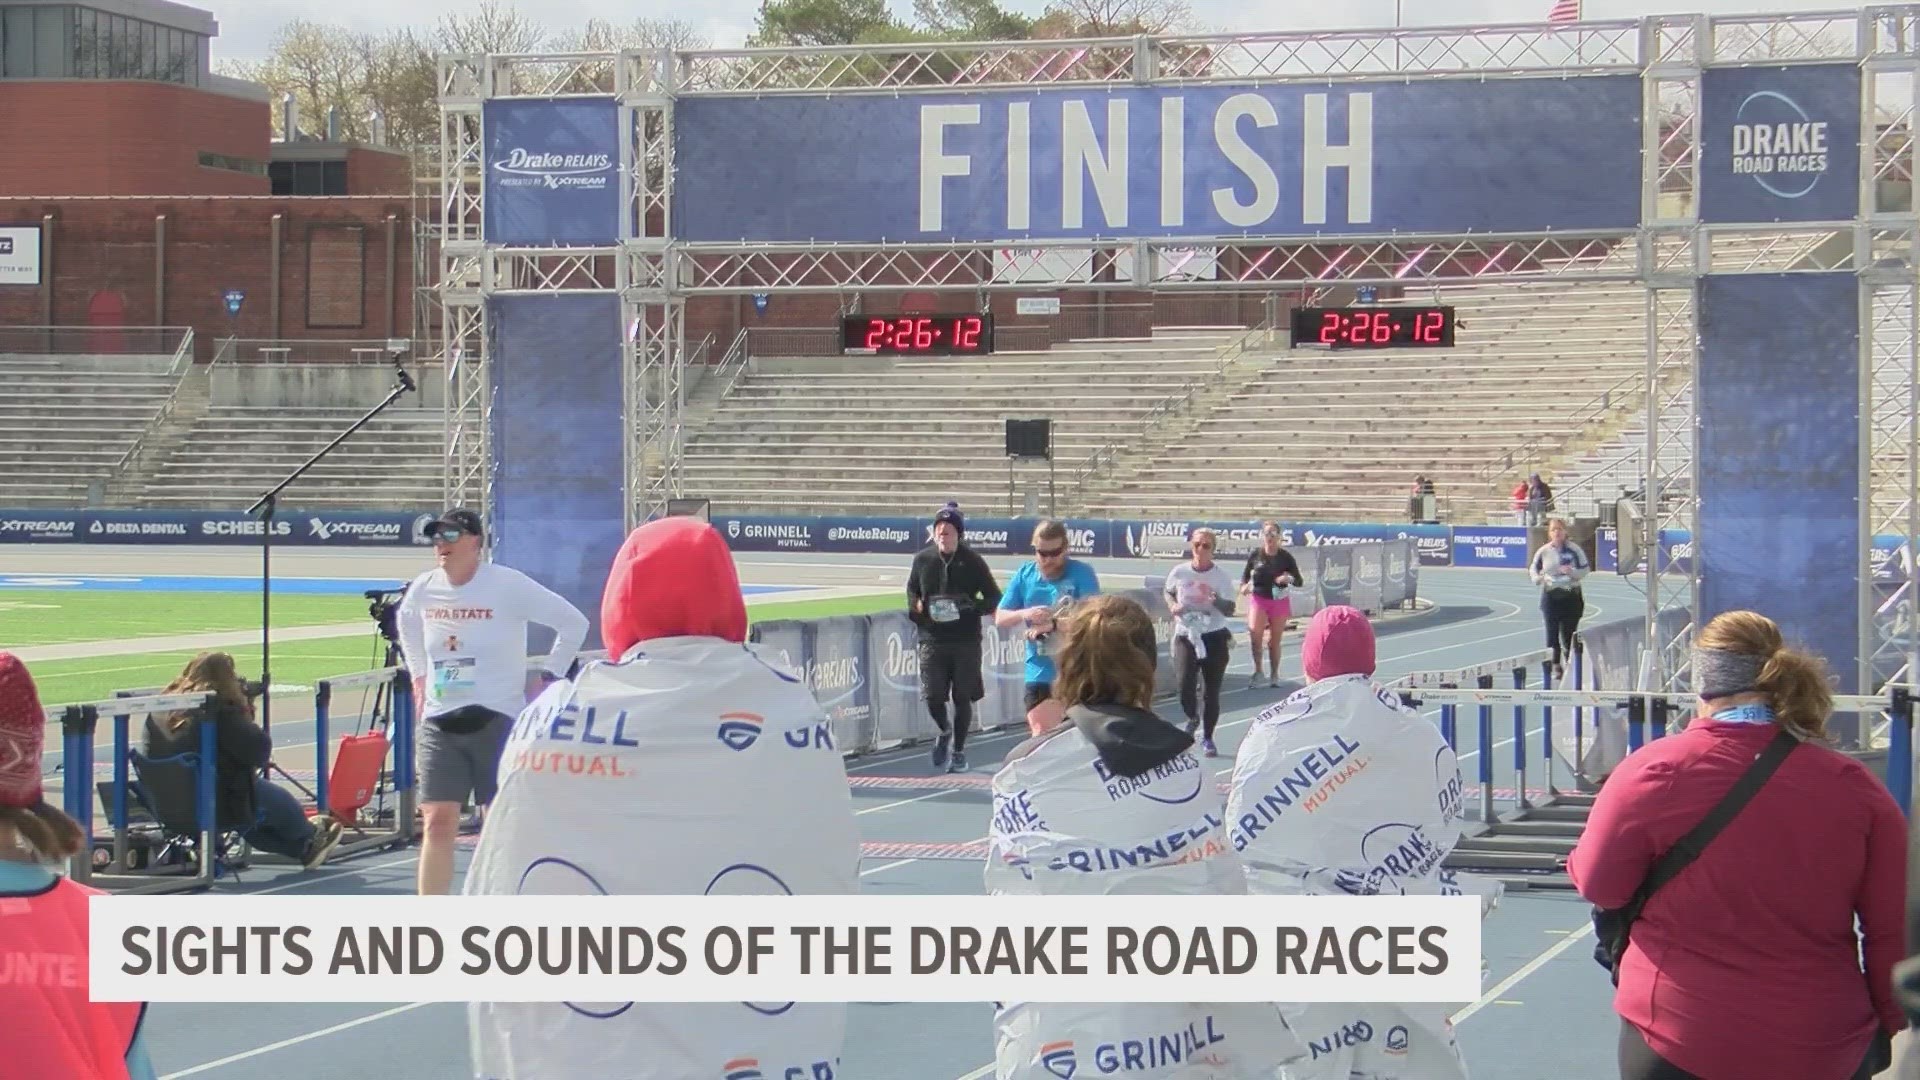 The Drake Relays officially kicked off Sunday as thousands of people competed in the 55th annual Drake Road Races.